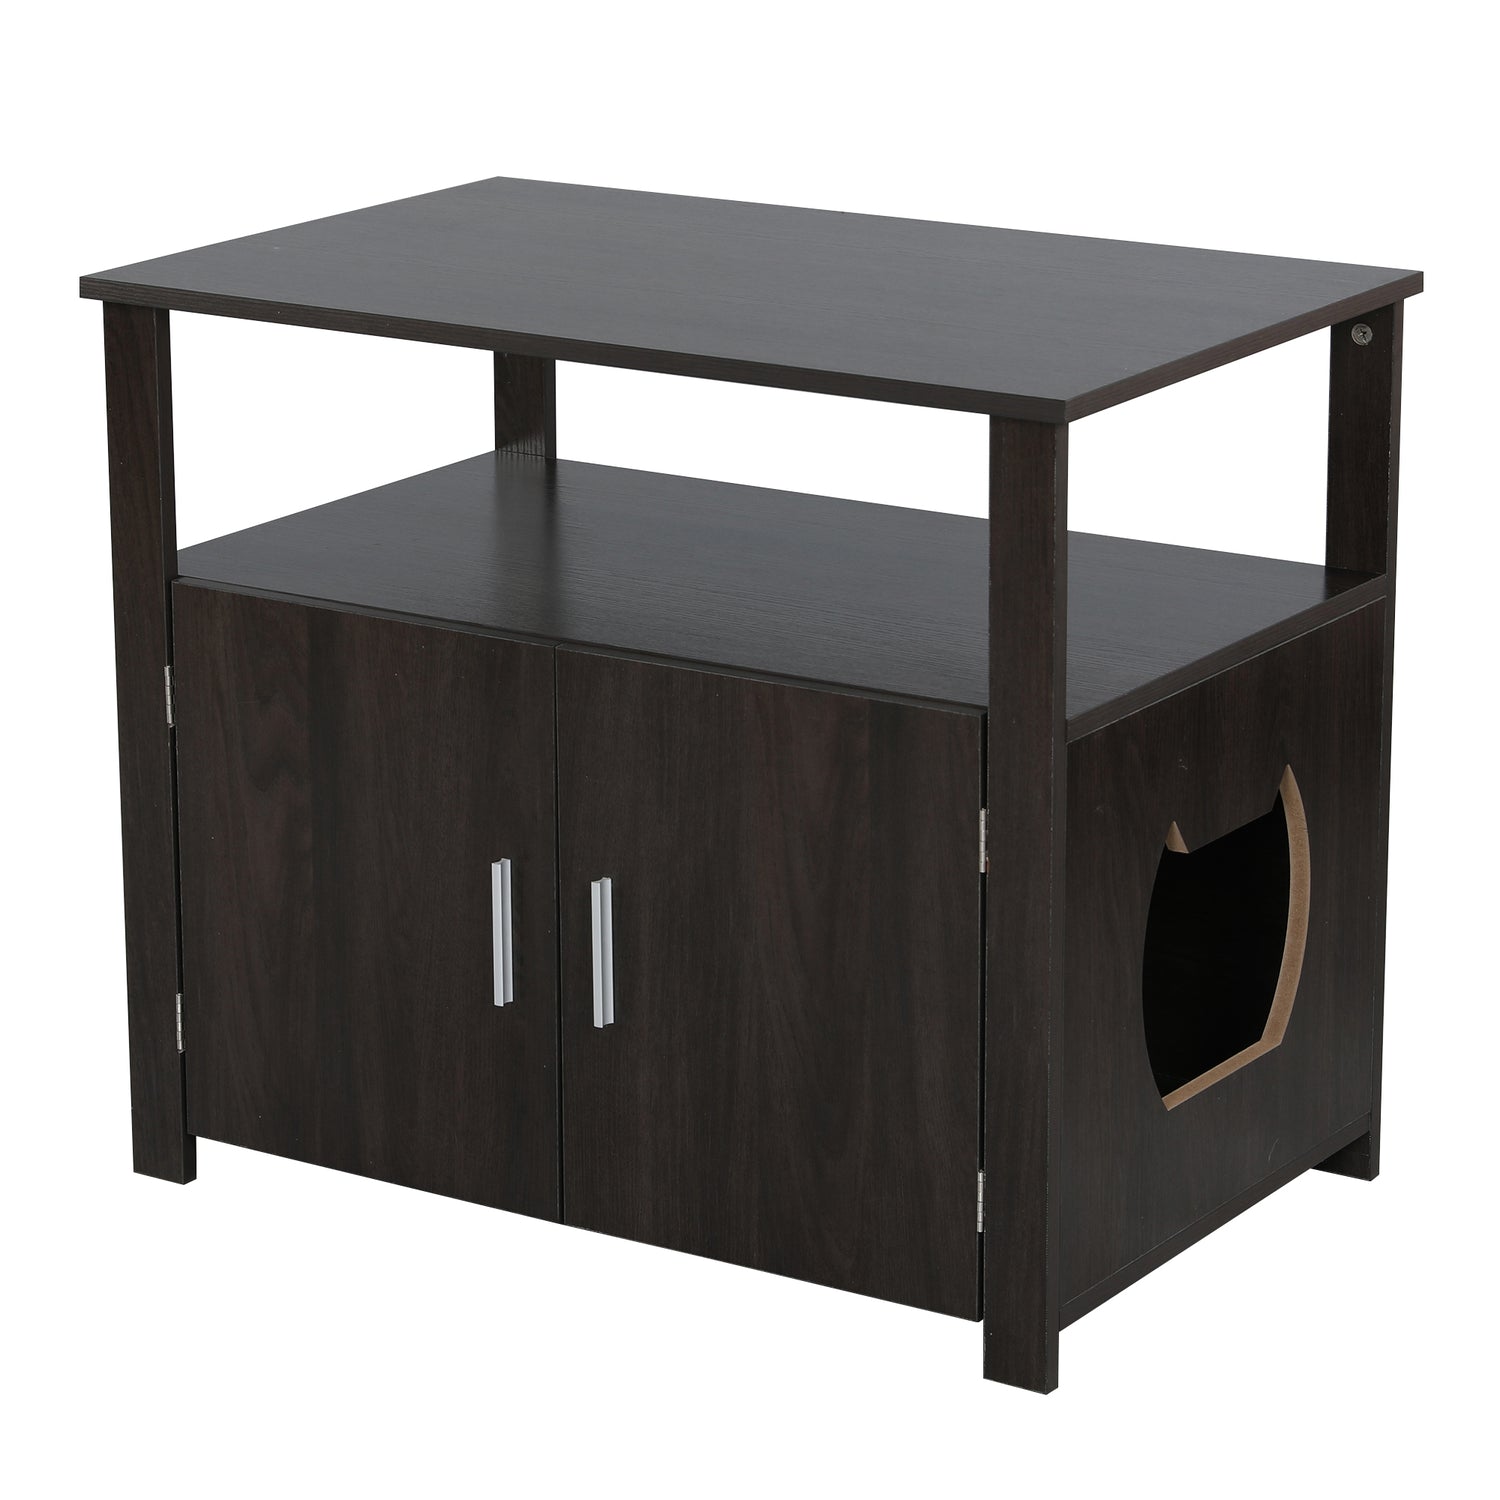 Dcenta 30 Inches Wooden Cat Litter Box Enclosure Furniture with Adjustable Interior Wall & Large Tabletop for Nightstand, Furniture Large Box House with Table